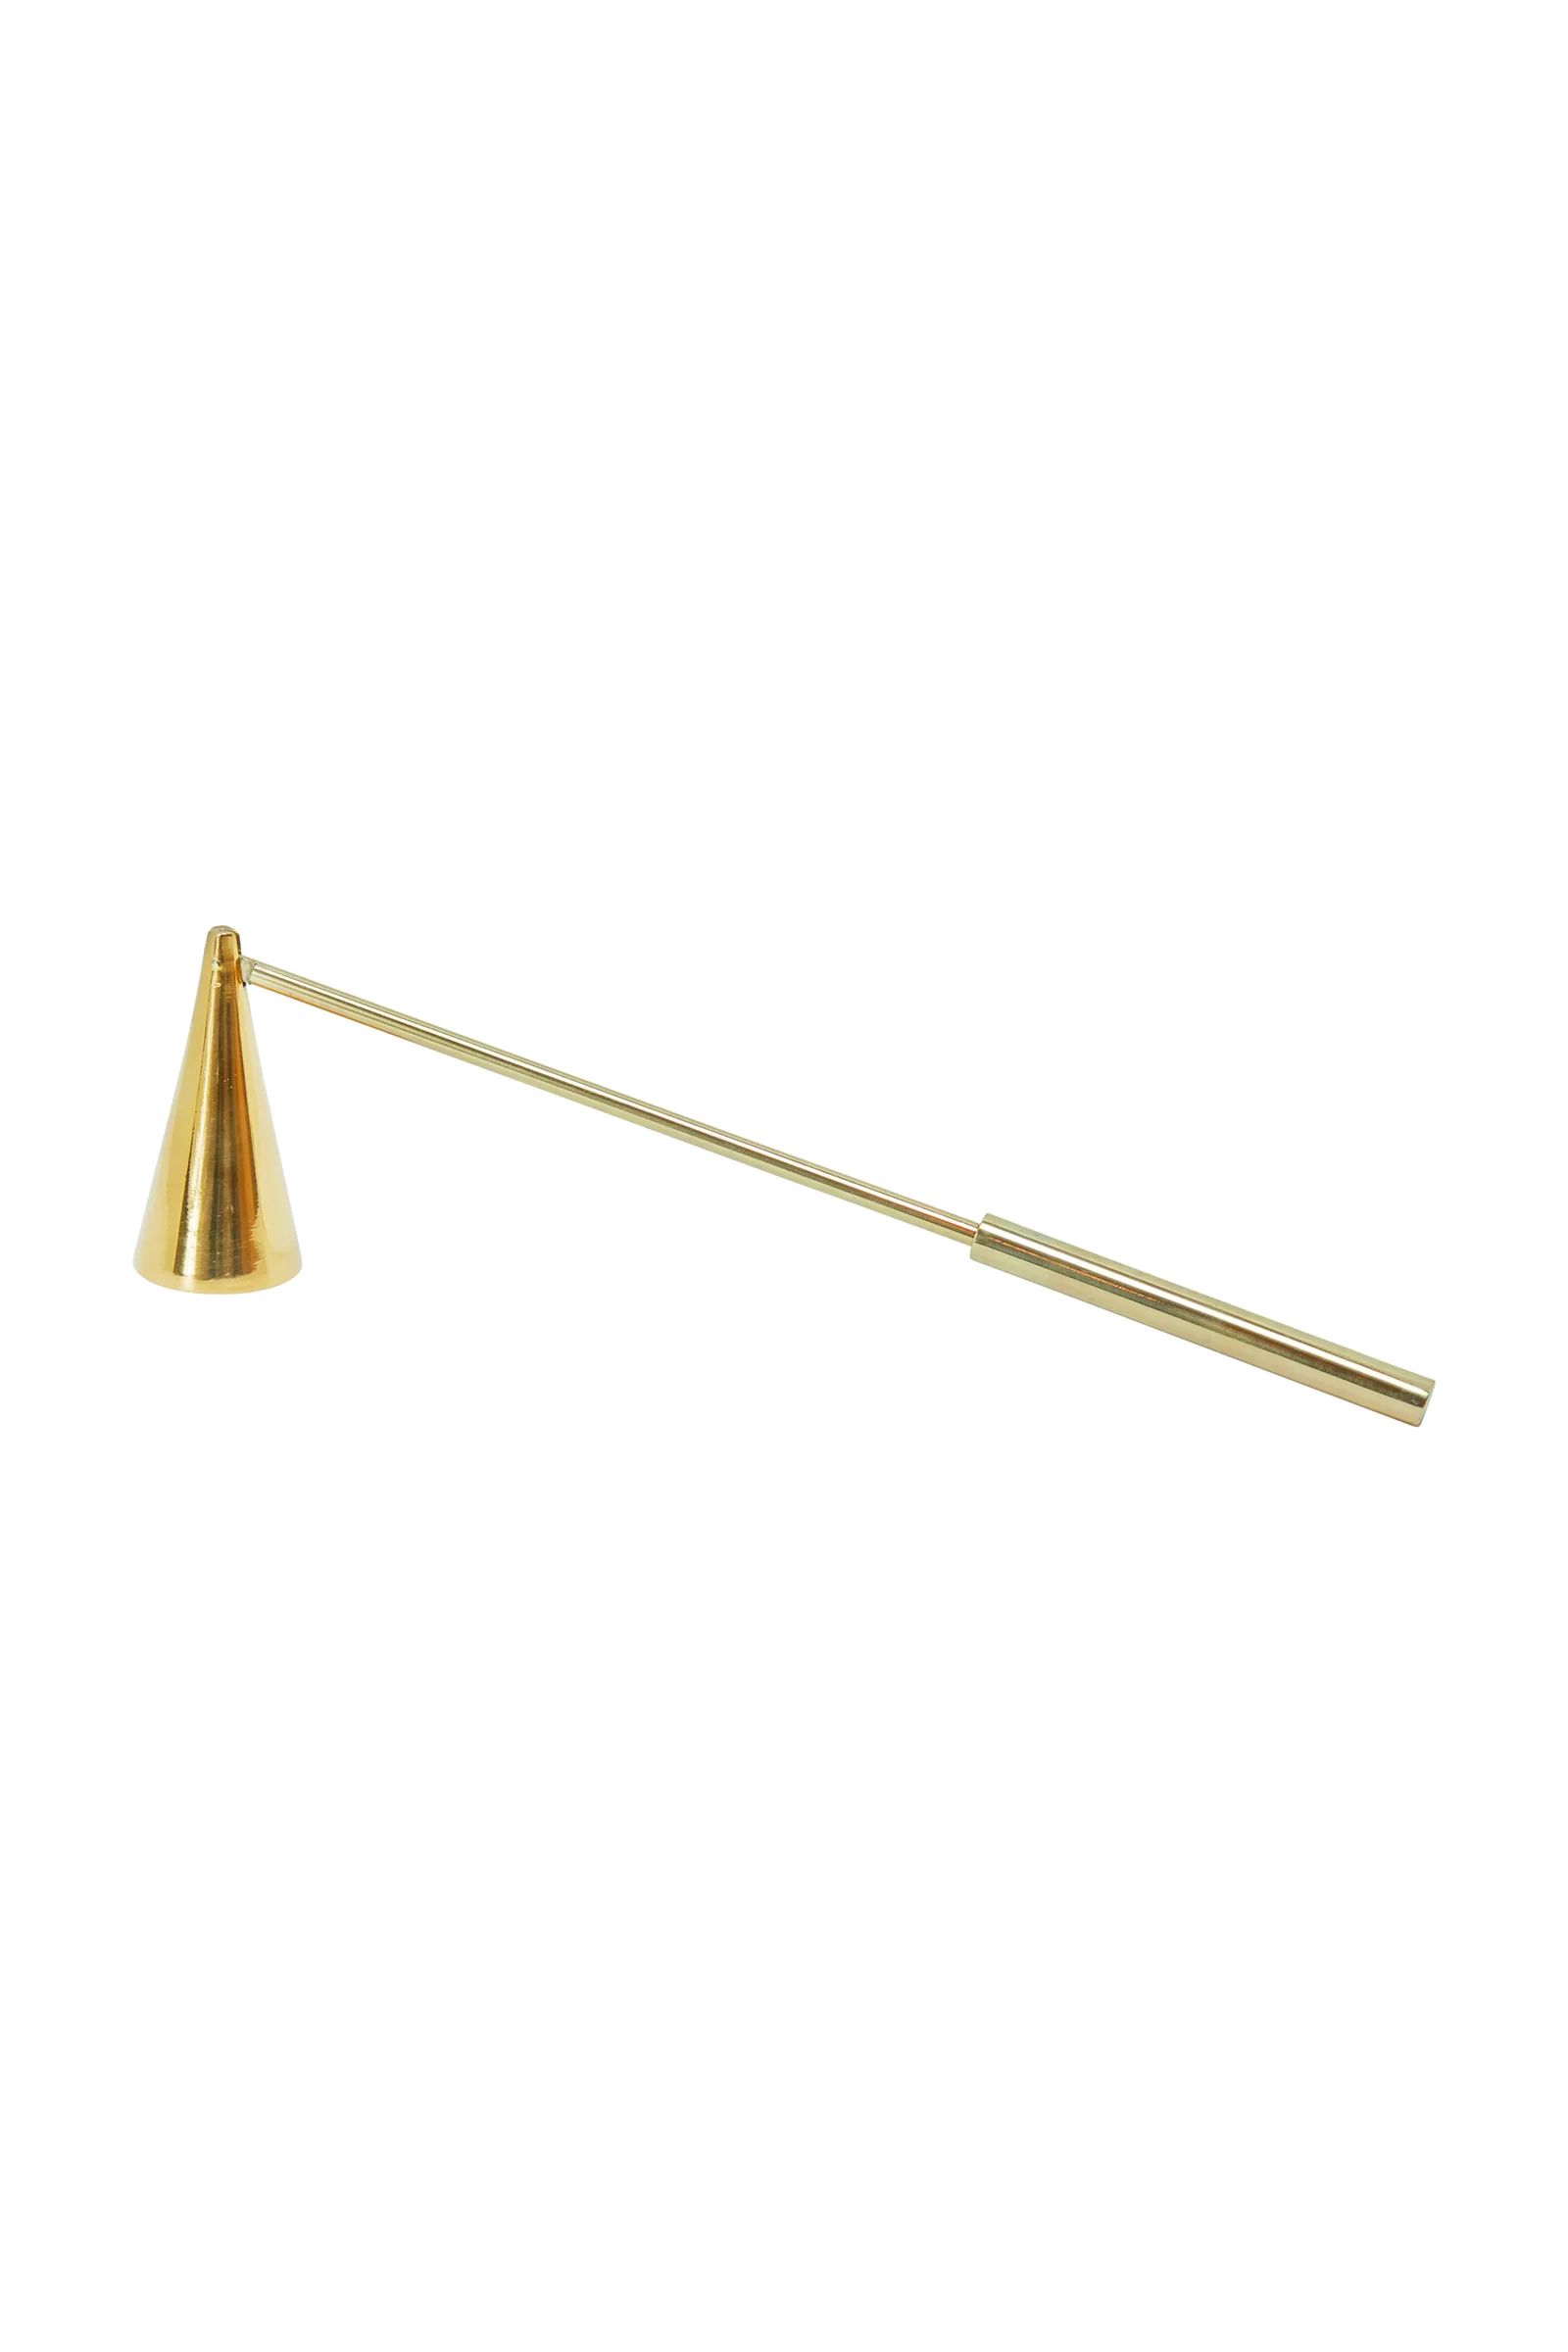 Brass Candle Douter | Paloma & Co.